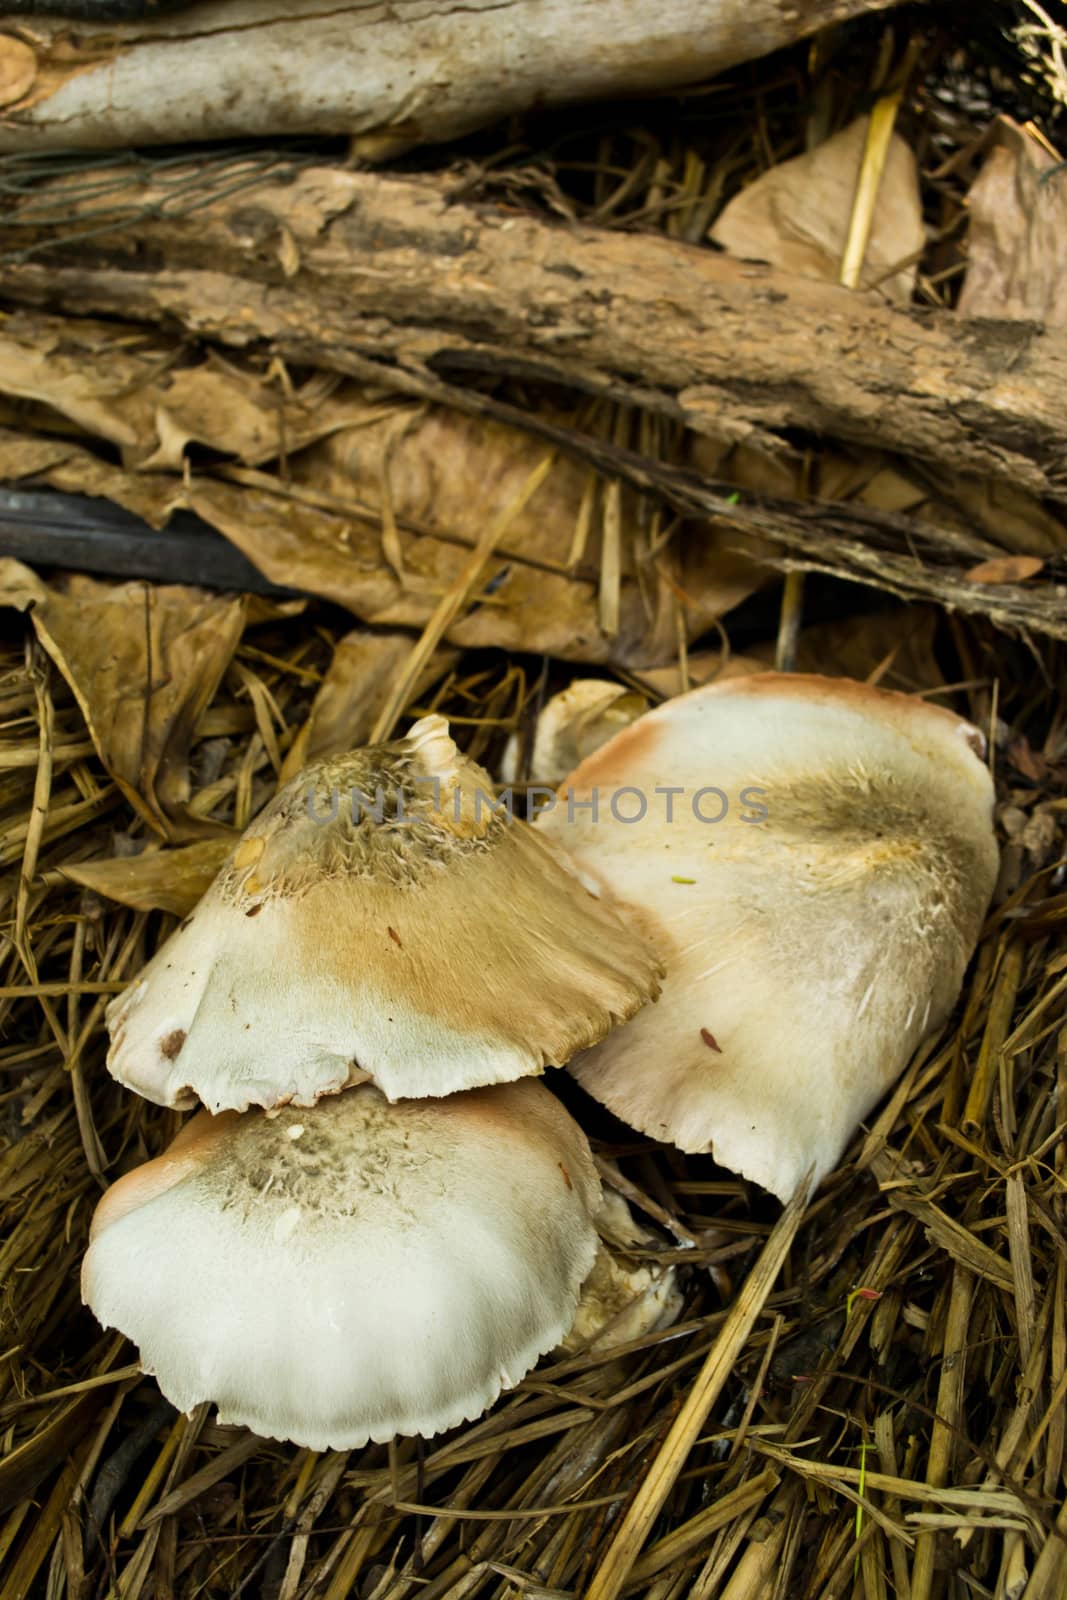 Mushrooms out on a pile of straw